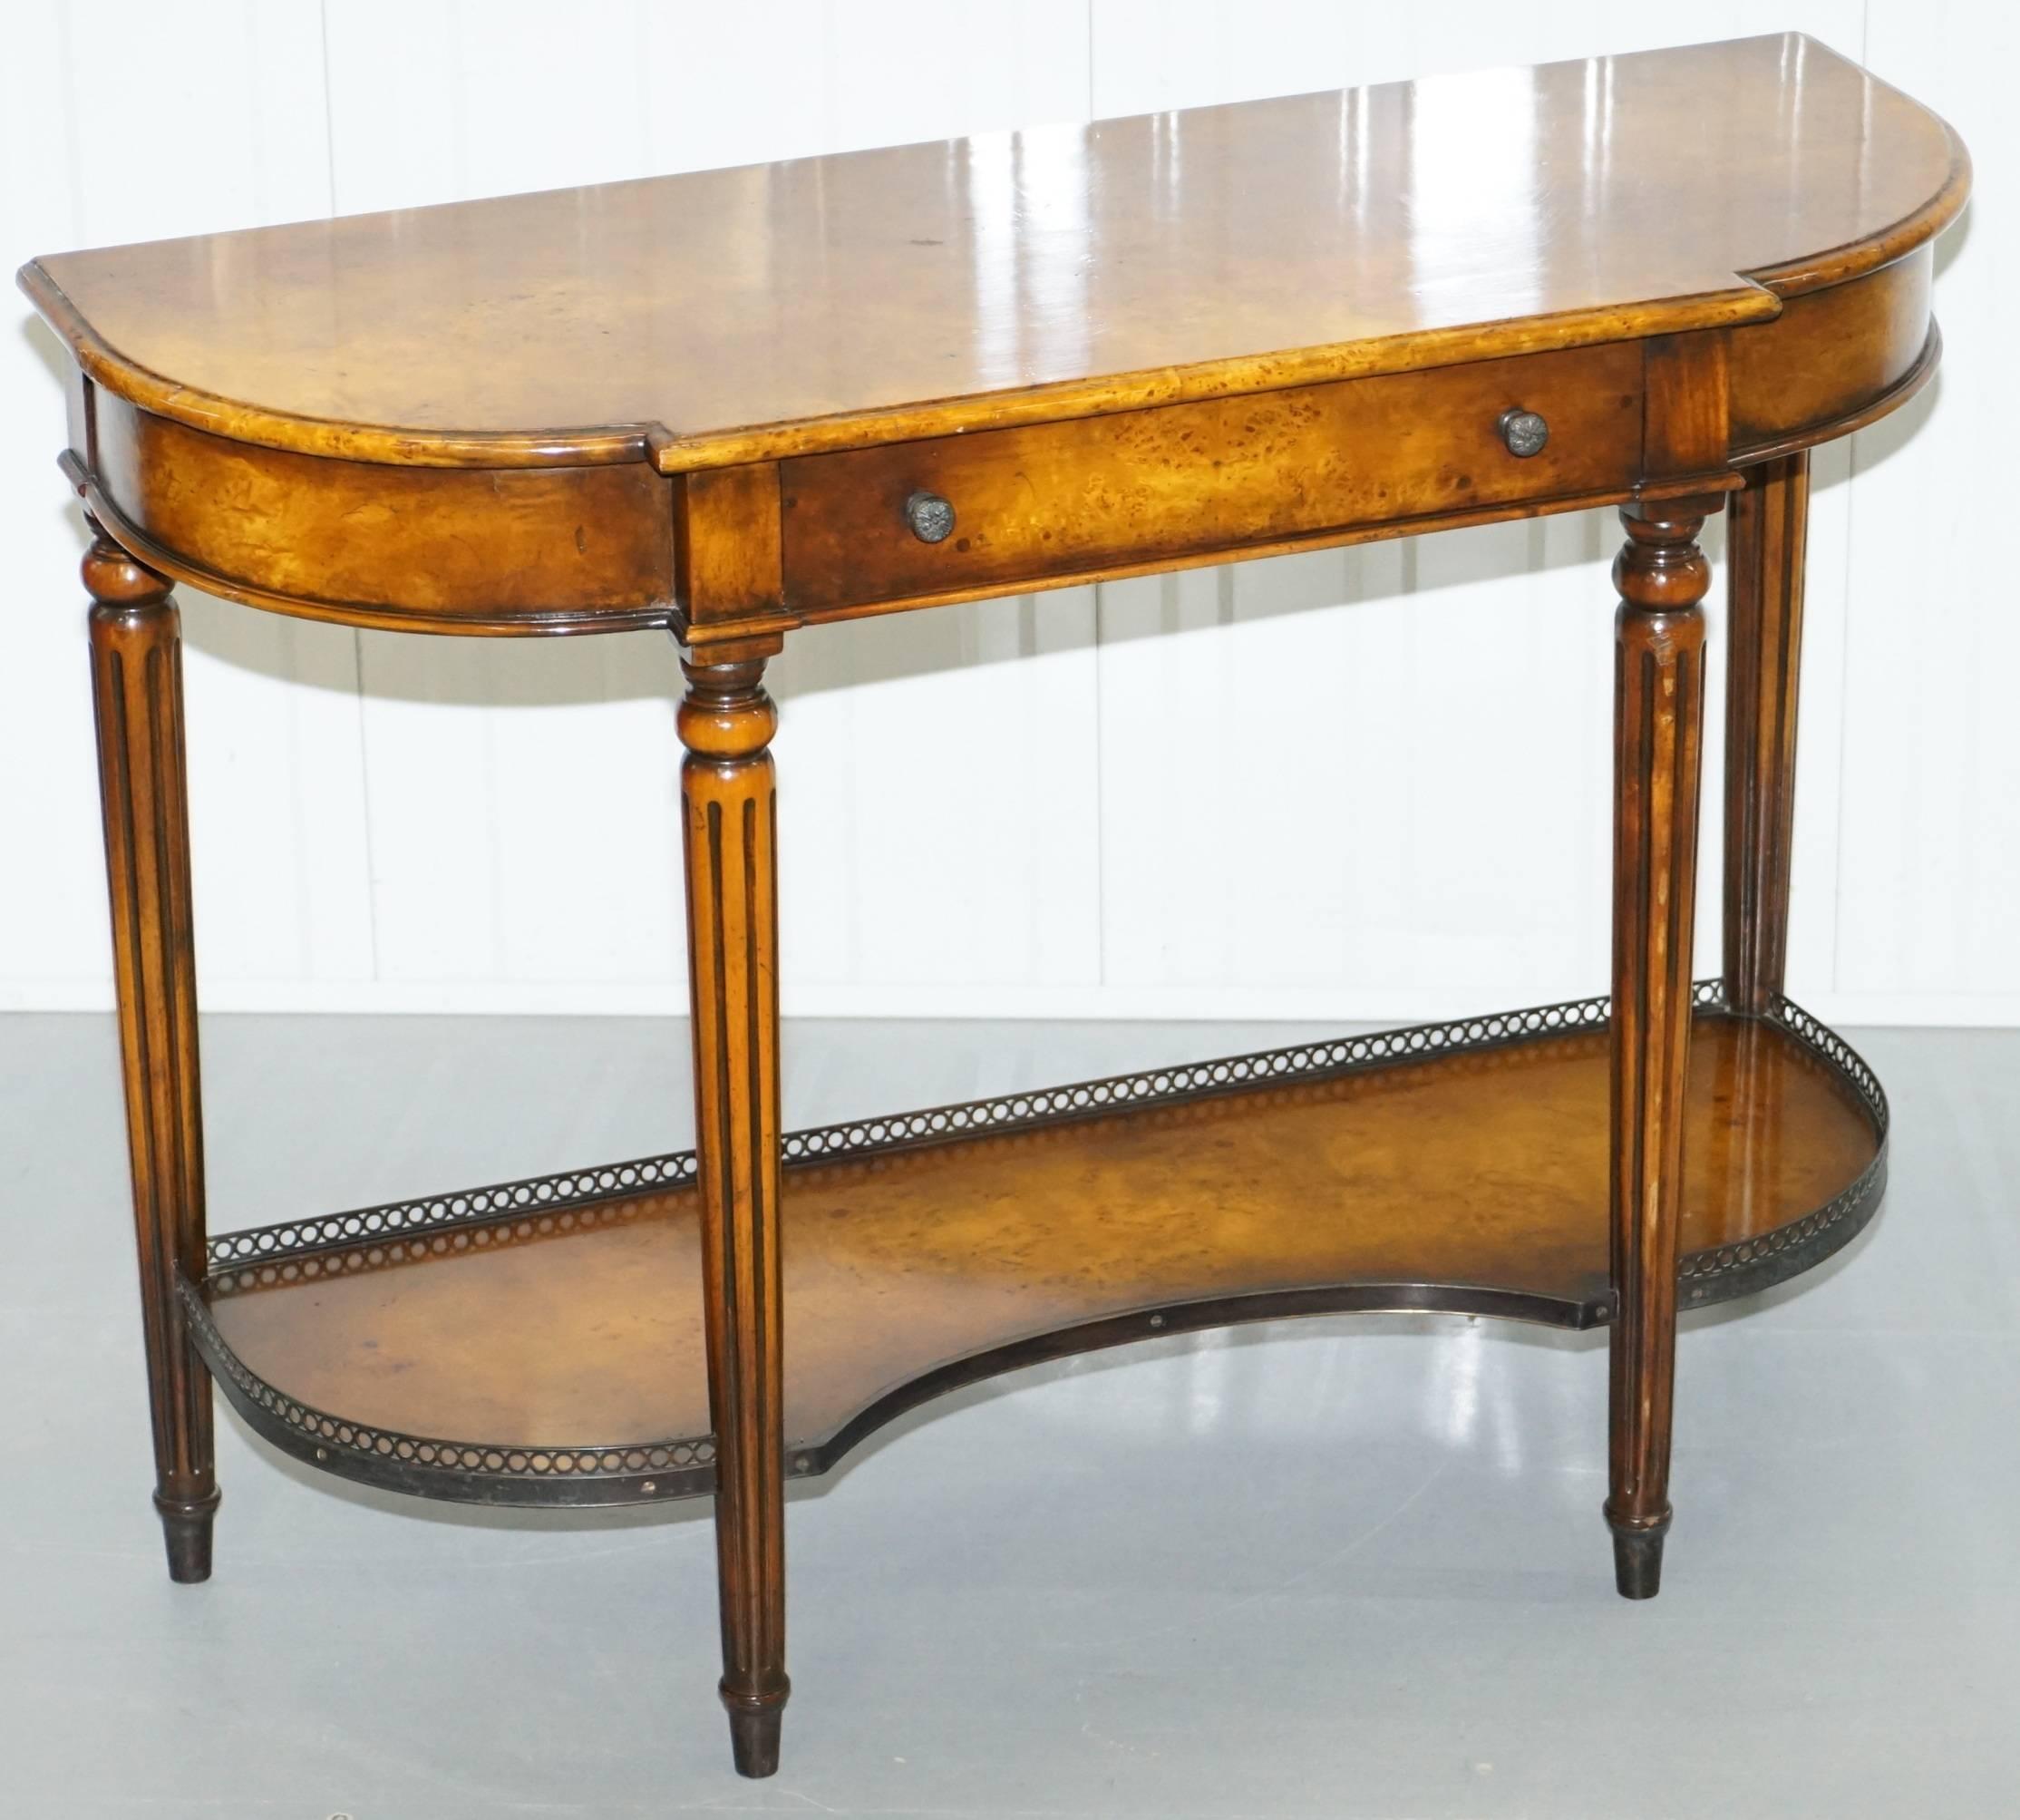 We are delighted to offer for sale this stunning burr walnut Theodore Alexander console table with single drawer and pierced fretwork detailing

A very good looking high end luxury piece in lightly restored condition throughout, there was one chip